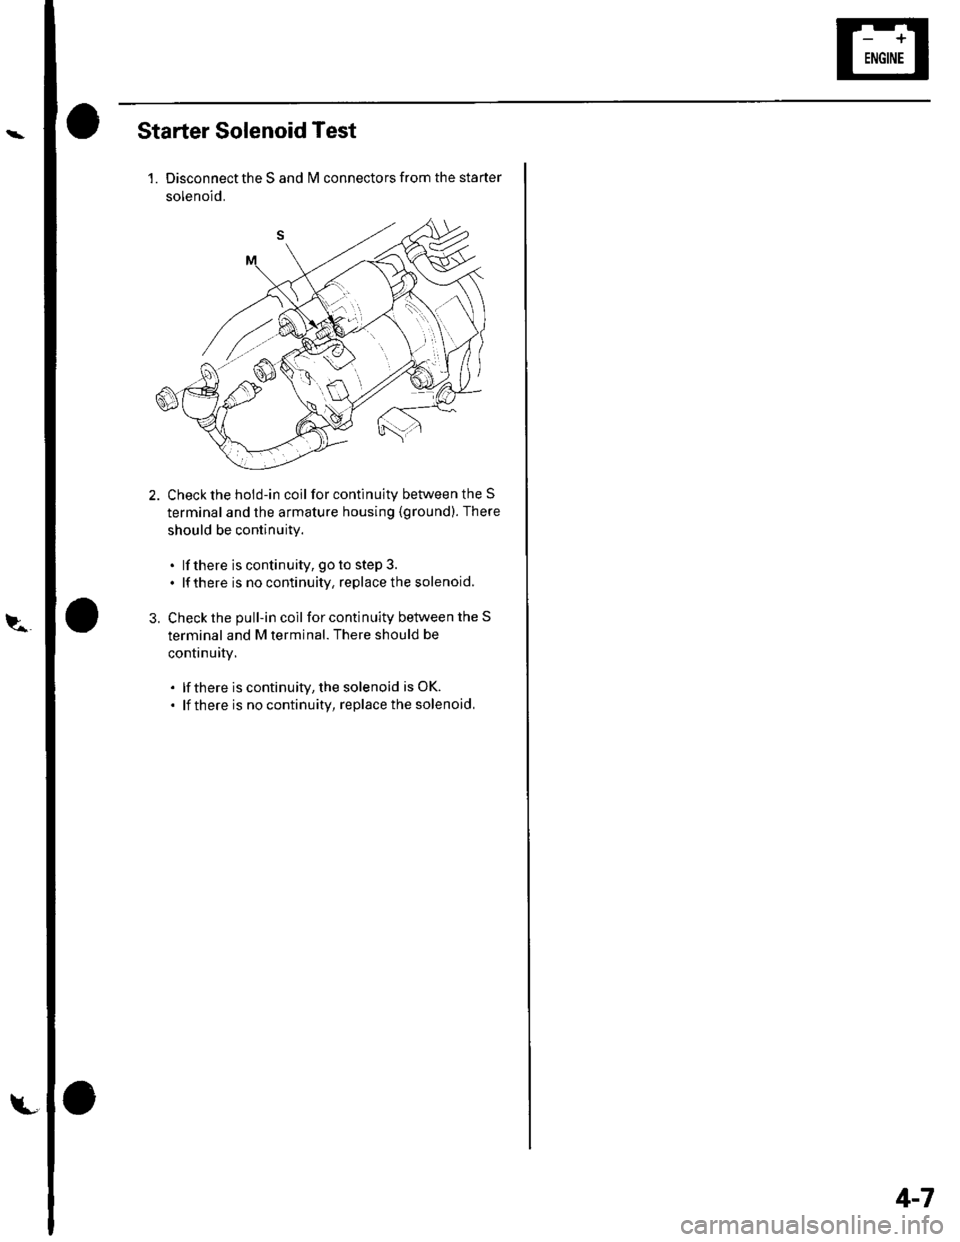 HONDA CIVIC 2003 7.G Service Manual et
Starter Solenoid Test
1. Disconnect the S and lvl connectors from the starter
solenoid.
2. Check the hold-in coil for continuity between the S
terminal and the armature housing (ground). There
shou